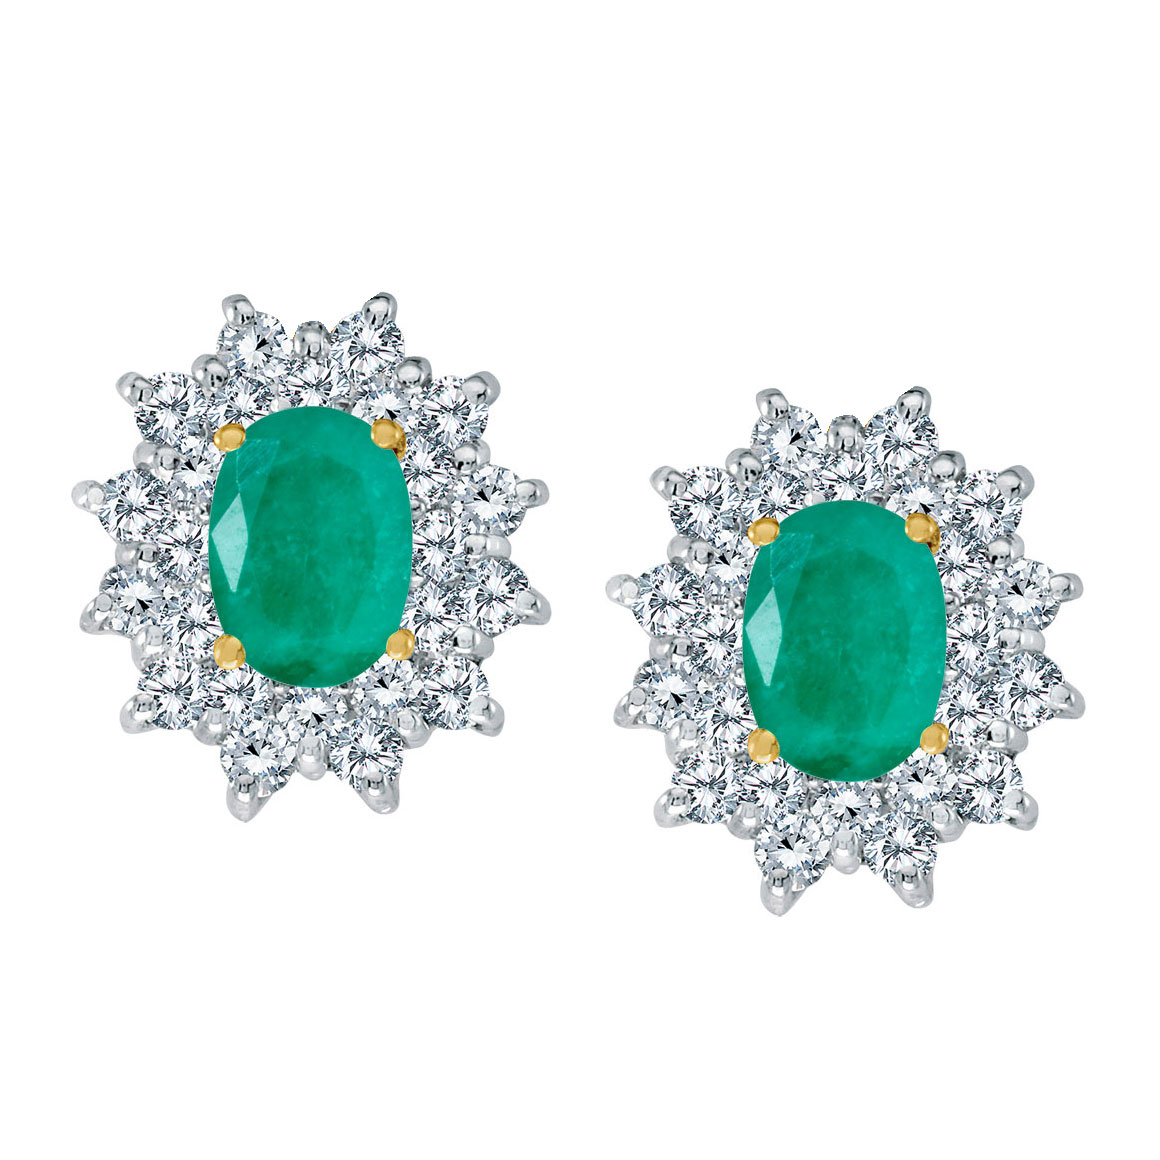 JCX2284: Bright 14k yellow gold earrings featuring 7x5 mm emeralds surrounded by 1.00 total carat of scintillating diamonds.